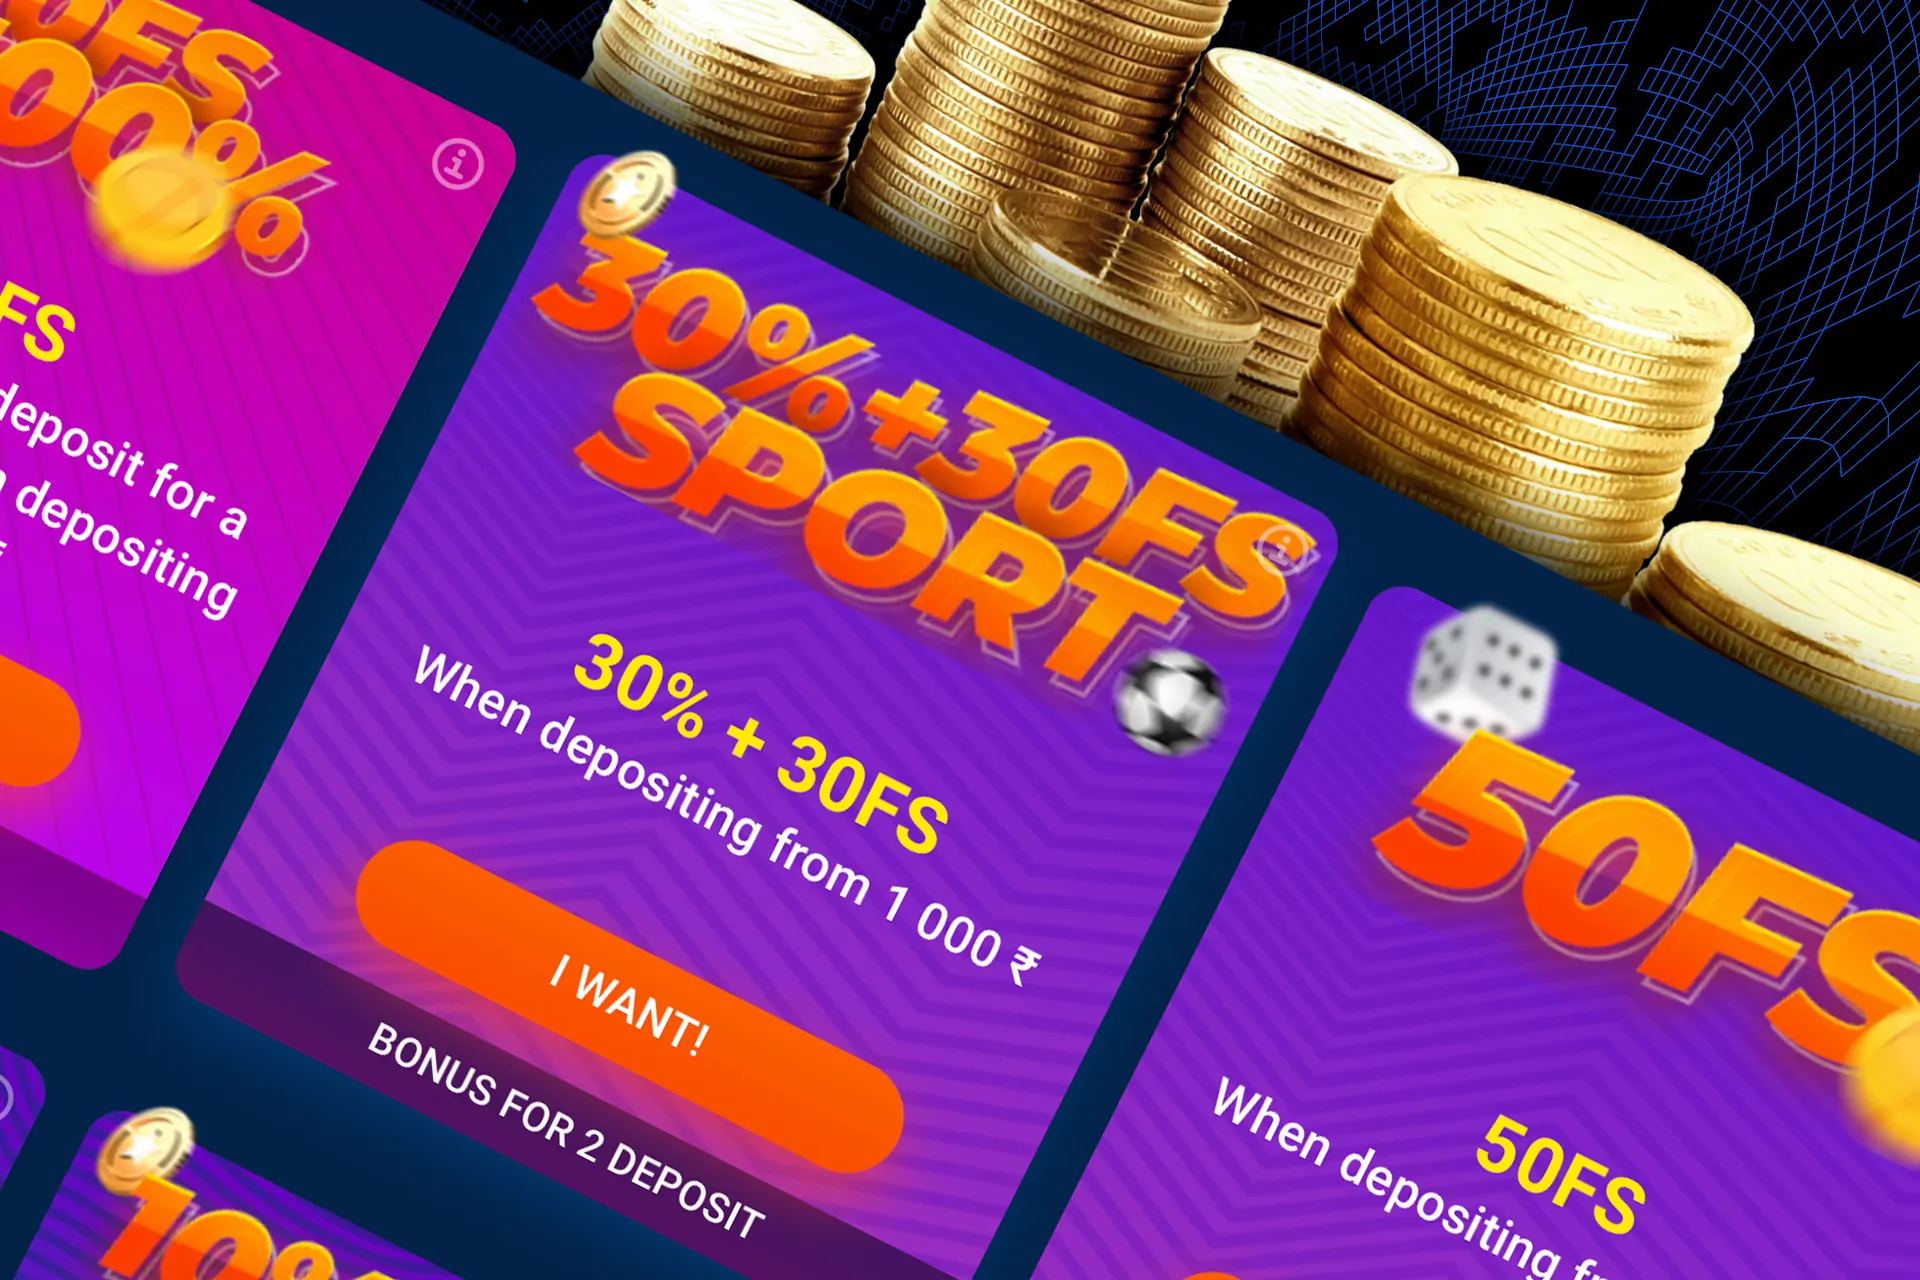 After registration, you can get a bonus on your second deposit to the Mostbet account as well.